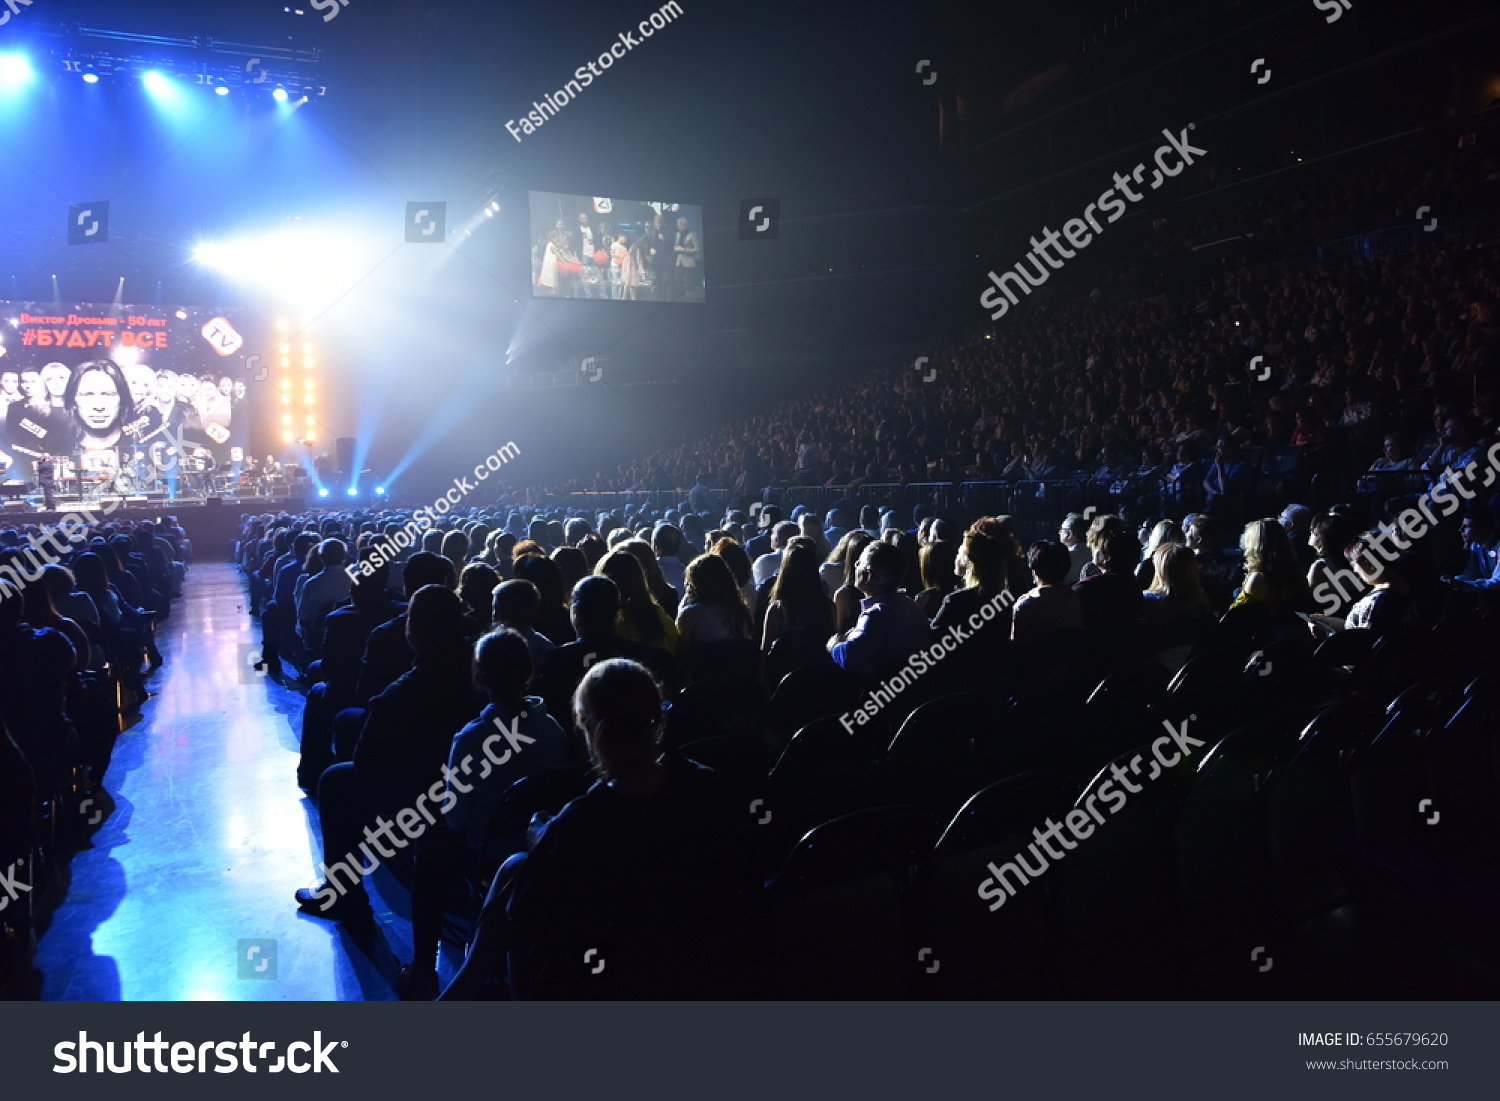 BROOKLYN, NY - JUNE 03: Over ten thousands people attend the Viktor Drobysh 50th year birthday concert at Barclay Center on June 03, 2017 in Brooklyn NY. #655679620